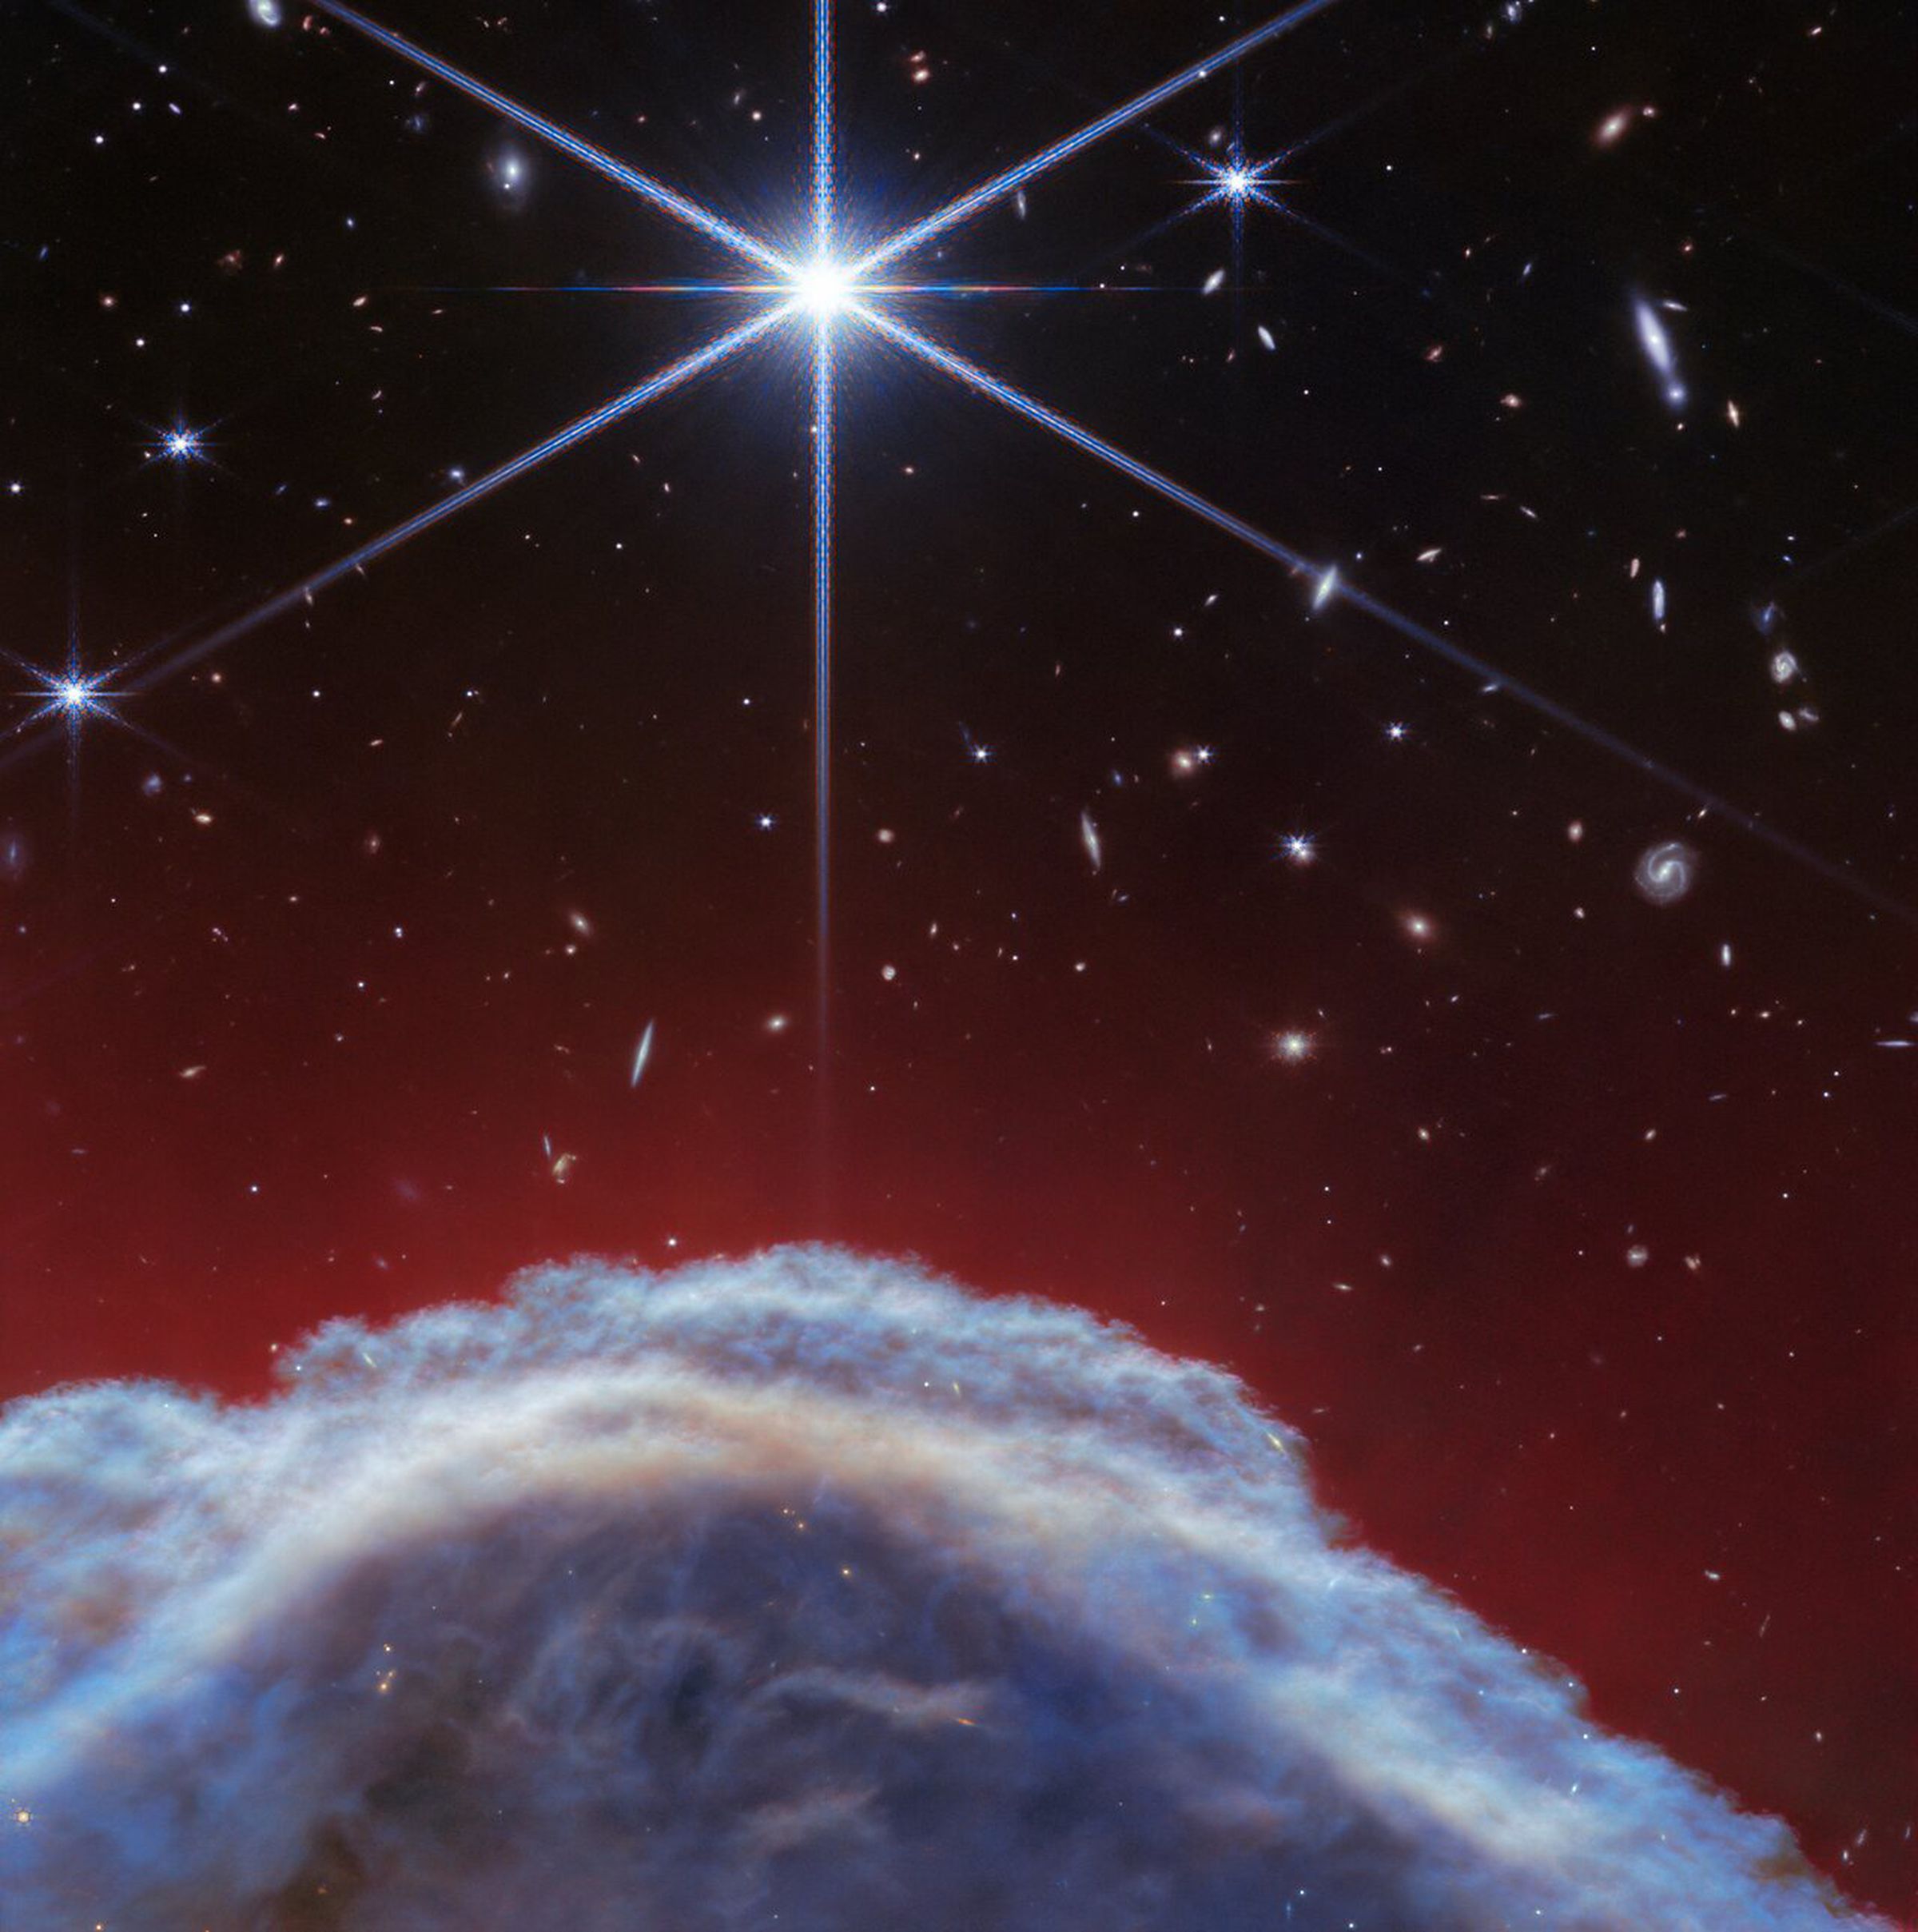 A color-shifted image of a portion of the Horsehead Nebula. The dust clouds are blue and brown, a reddish glow follows their contour, and stars and galaxies sit in the background.